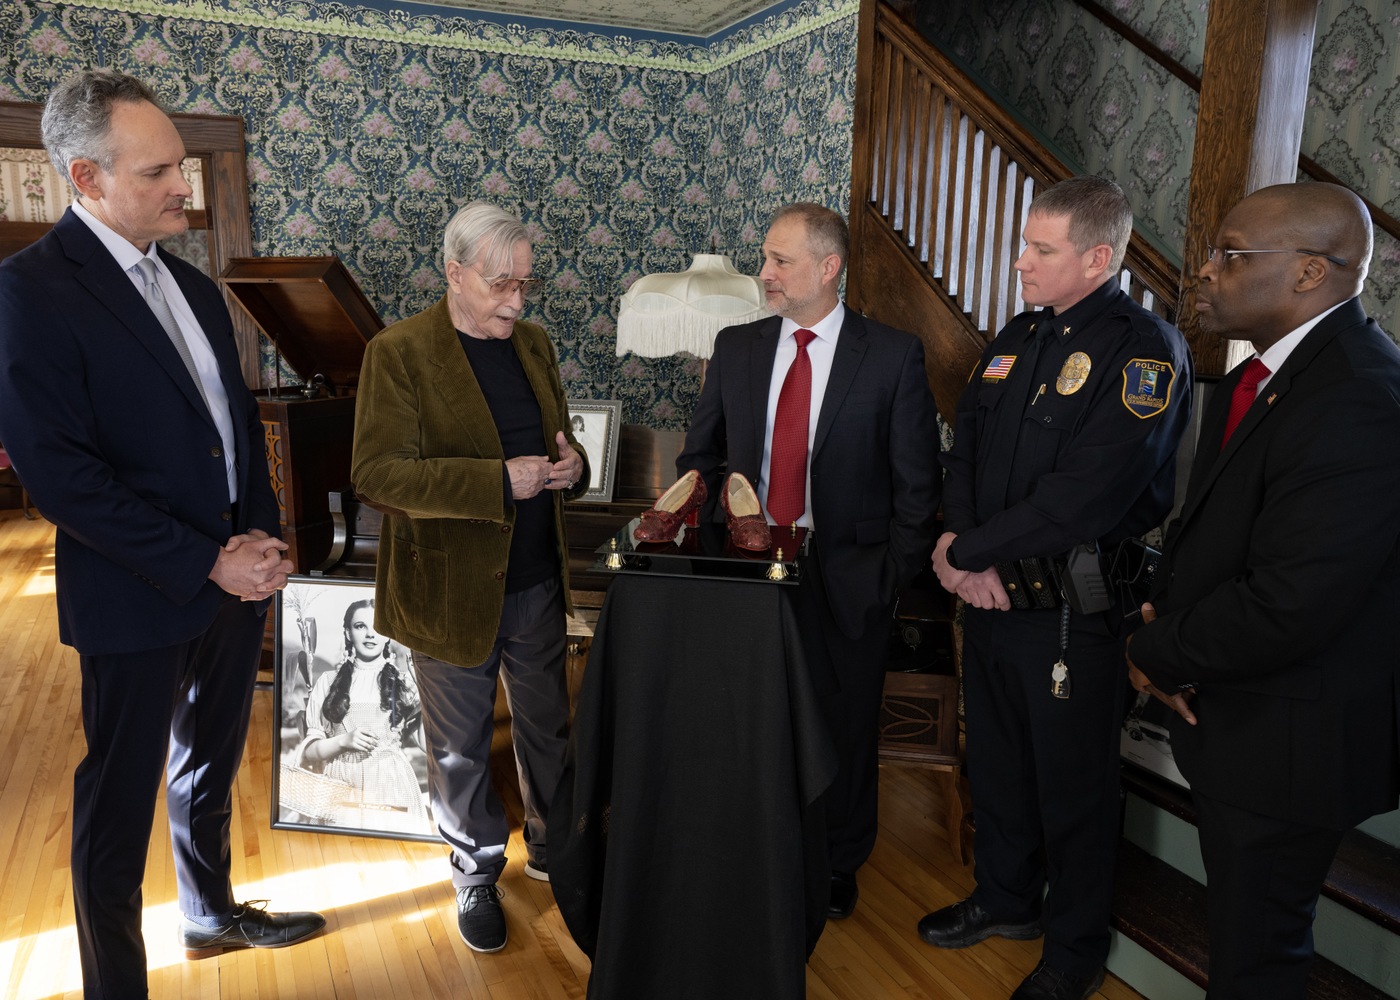 This photo shows (from left to right) Brian Chanes from Heritage Auctions, ruby slippers owner Michael Shaw, Special Agent Christopher Dudley of FBI Minneapolis, Grand Rapids Police Department Chief Andy Morgan, and FBI Minneapolis Special Agent in Charge Alvin M. Winston, Sr., as Shaw is joyfully reunited with the ruby slippers after nearly a decade. The event unfolded in Judy Garland’s childhood home at the Judy Garland Museum in Grand Rapids, Minnesota. Placed atop the very pedestal from which they were stolen in 2005, the return of the slippers provided a poignant moment of closure.